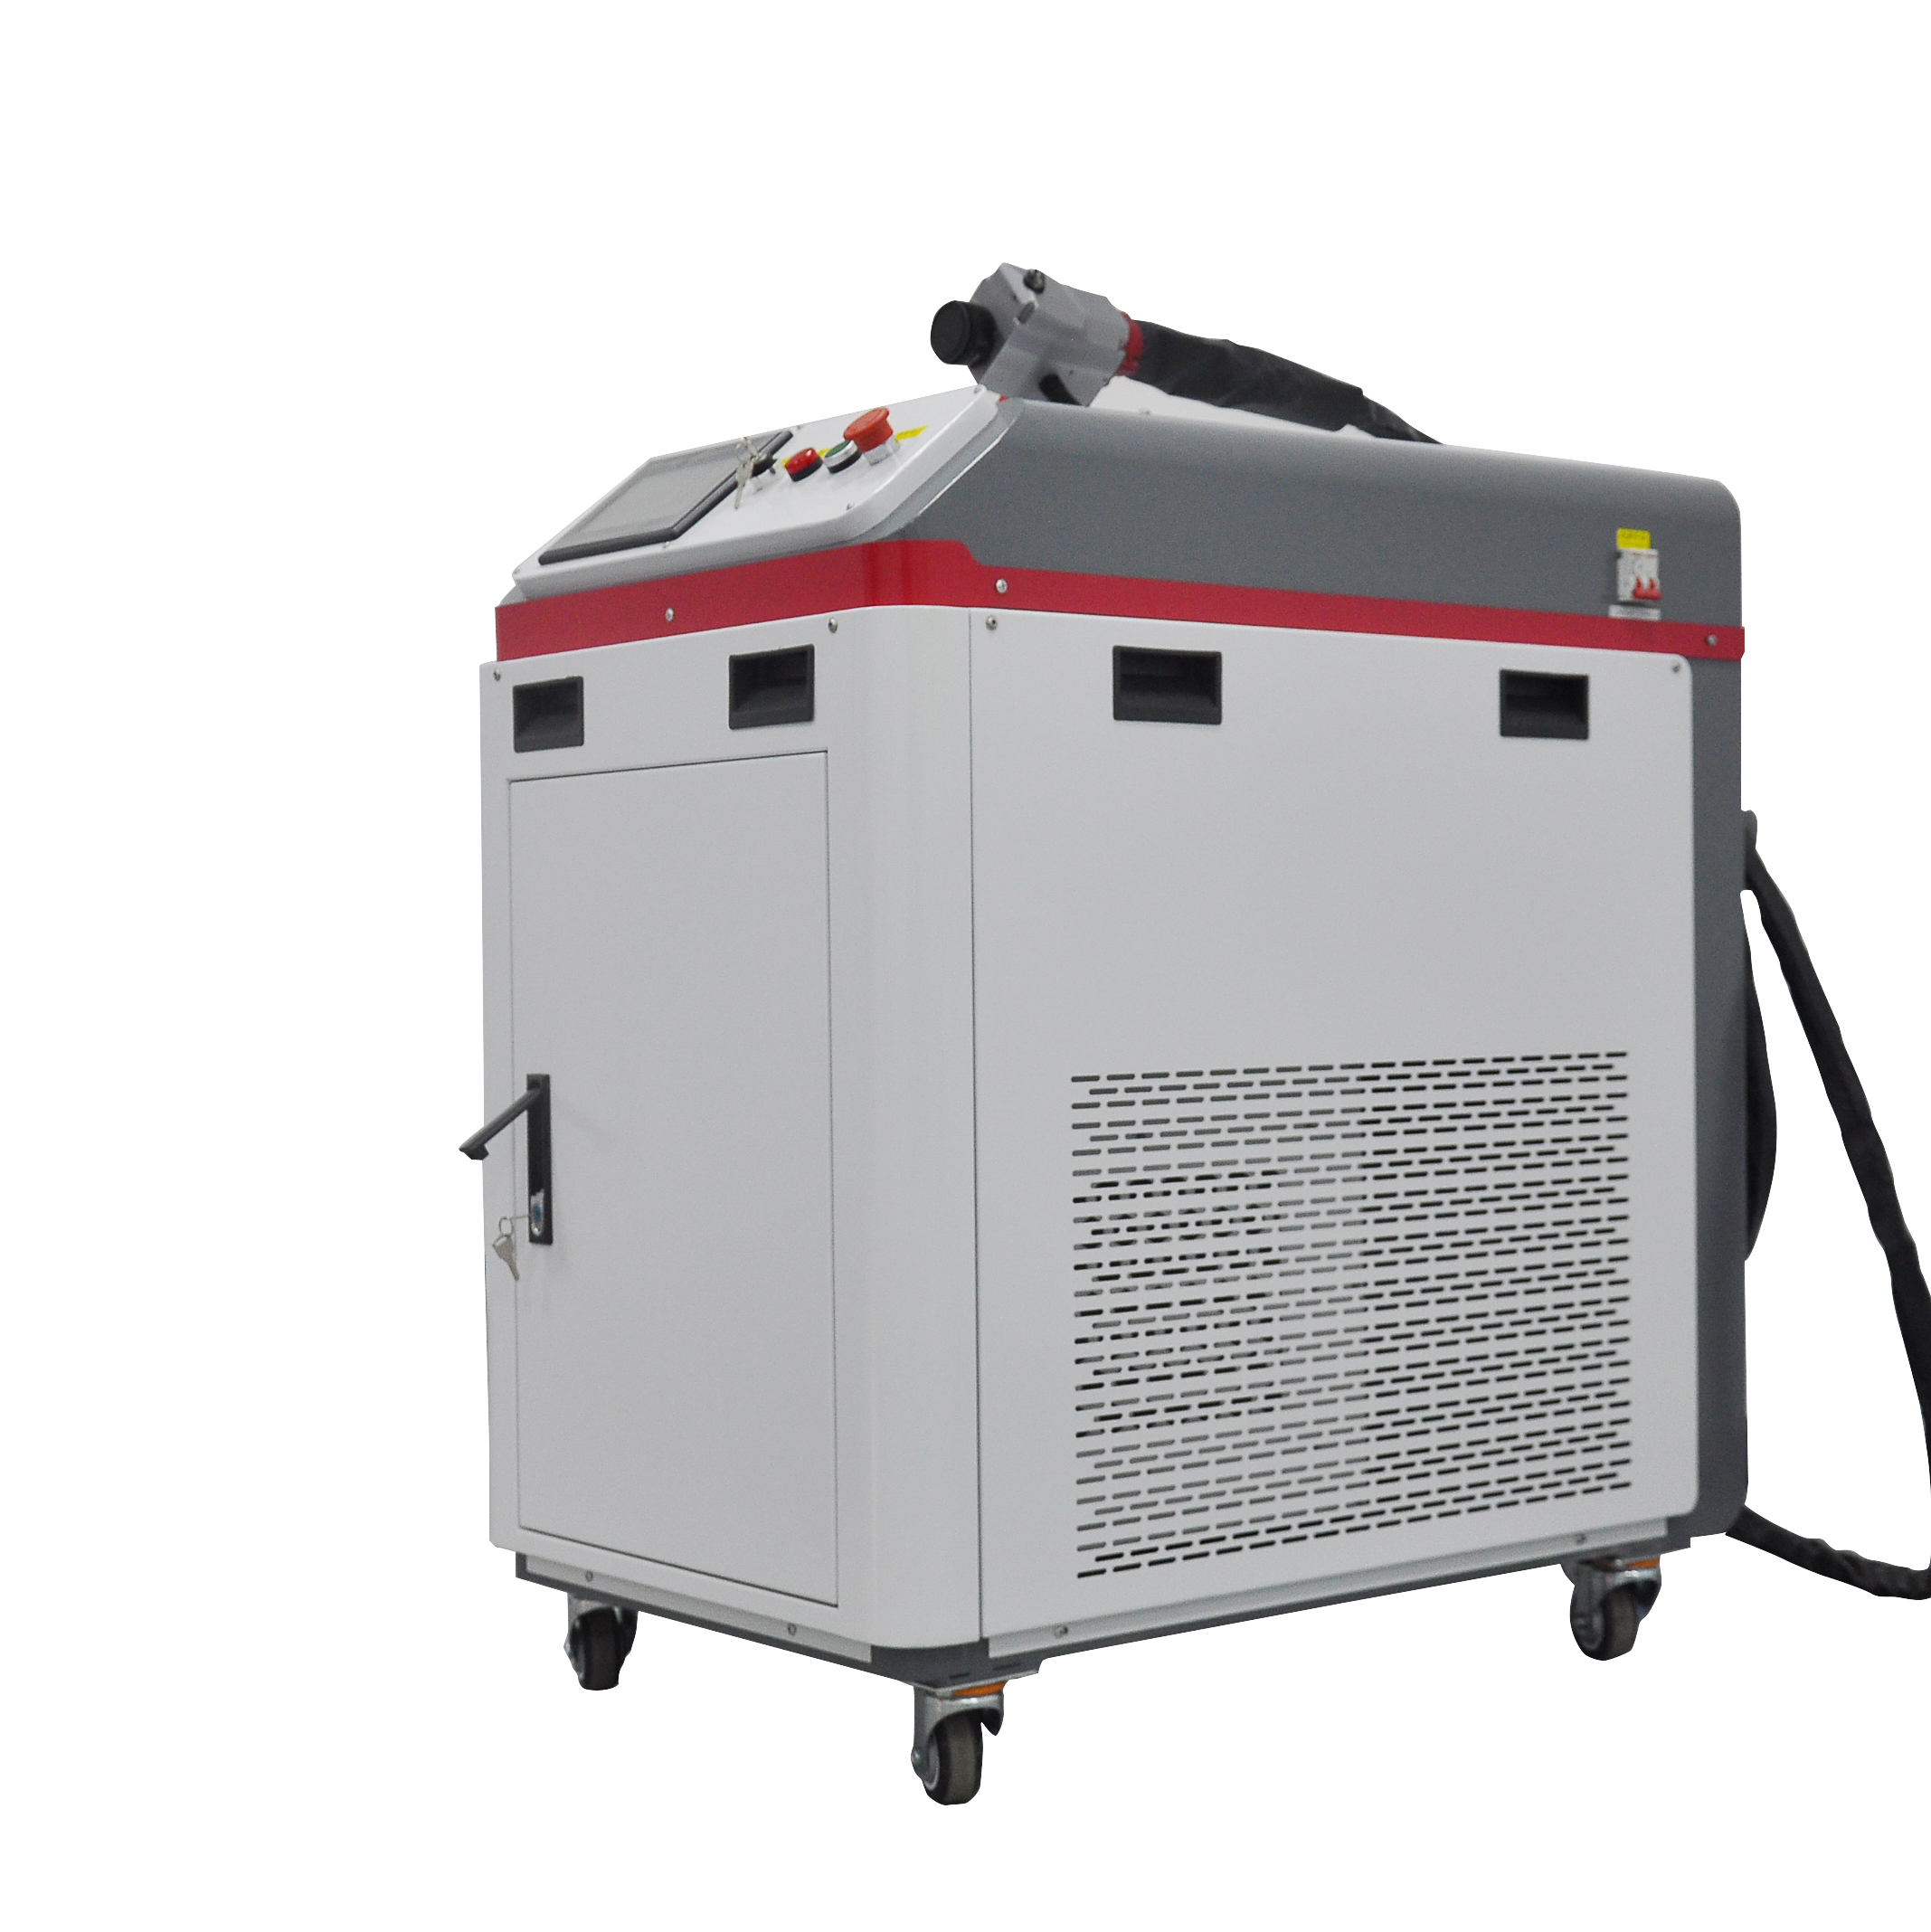 JPT Raycus MAX Portable Laser Cleaning Machine Lithium Battery